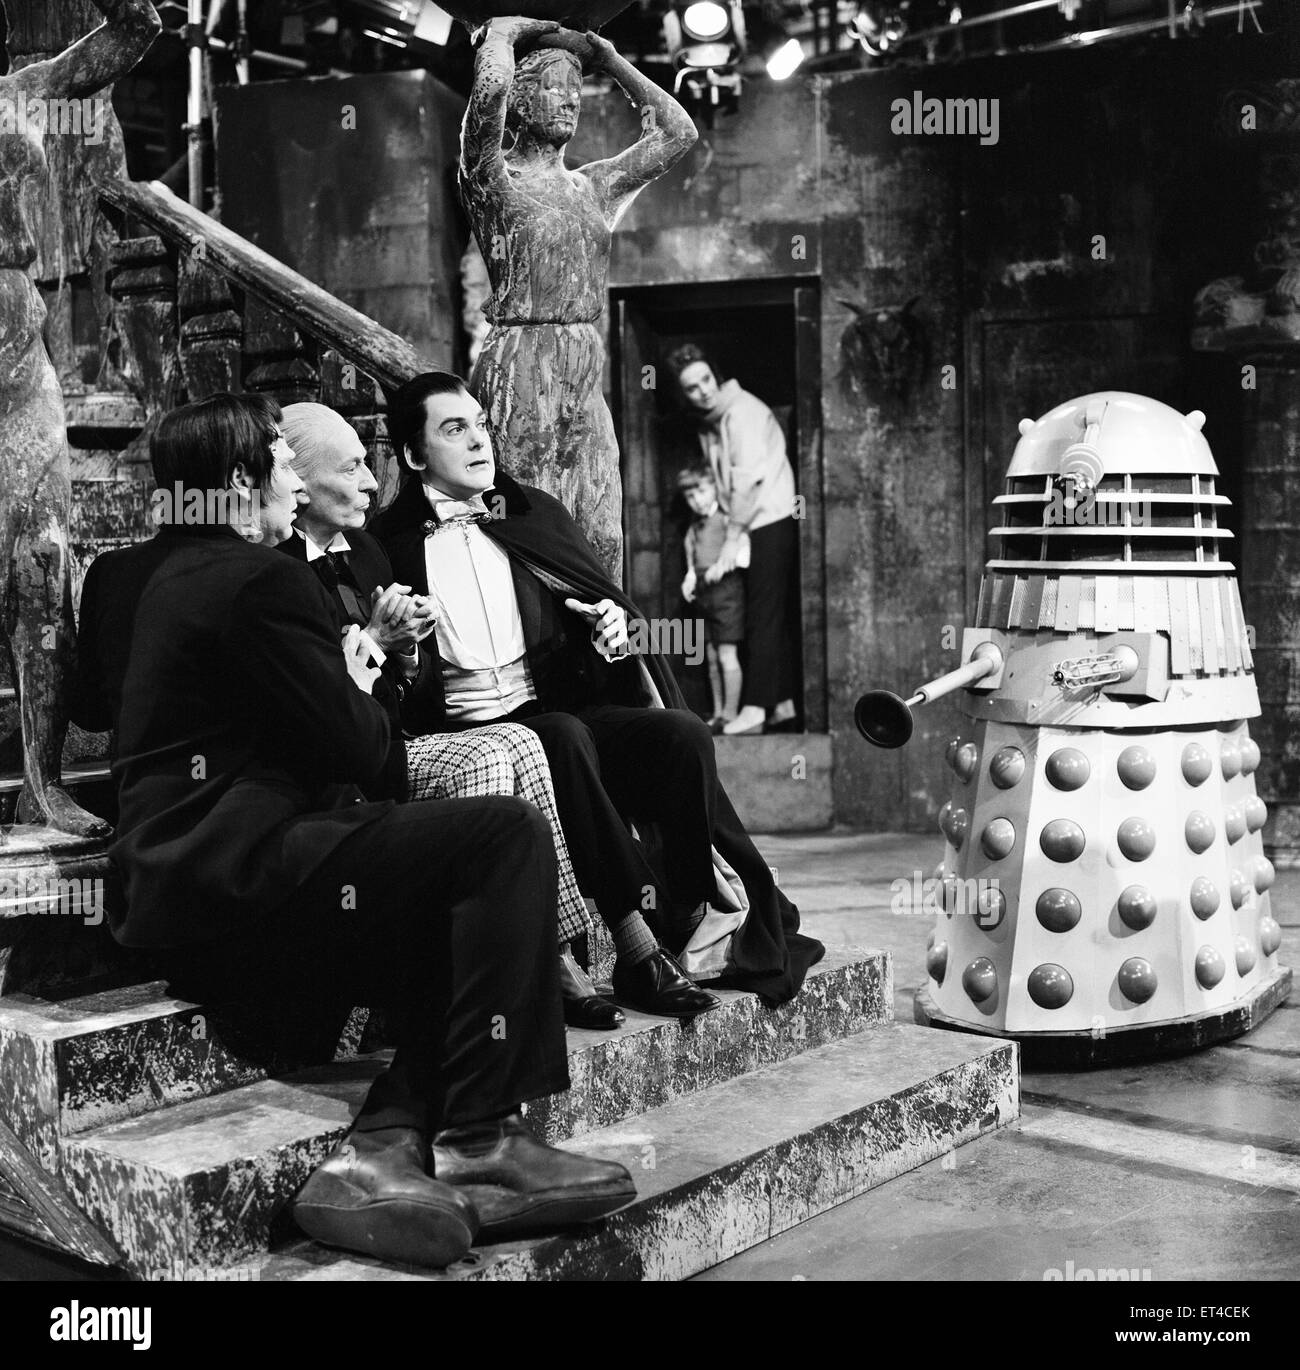 Actor William Hartnell - the first Doctor - pictured during rehearsals at Television Centre 21st May 1965. Dr Who Story - The Chase, starring The Daleks, Frankenstein played by John Maxim & Count Dracula played by Malcolm Rogers. Stock Photo